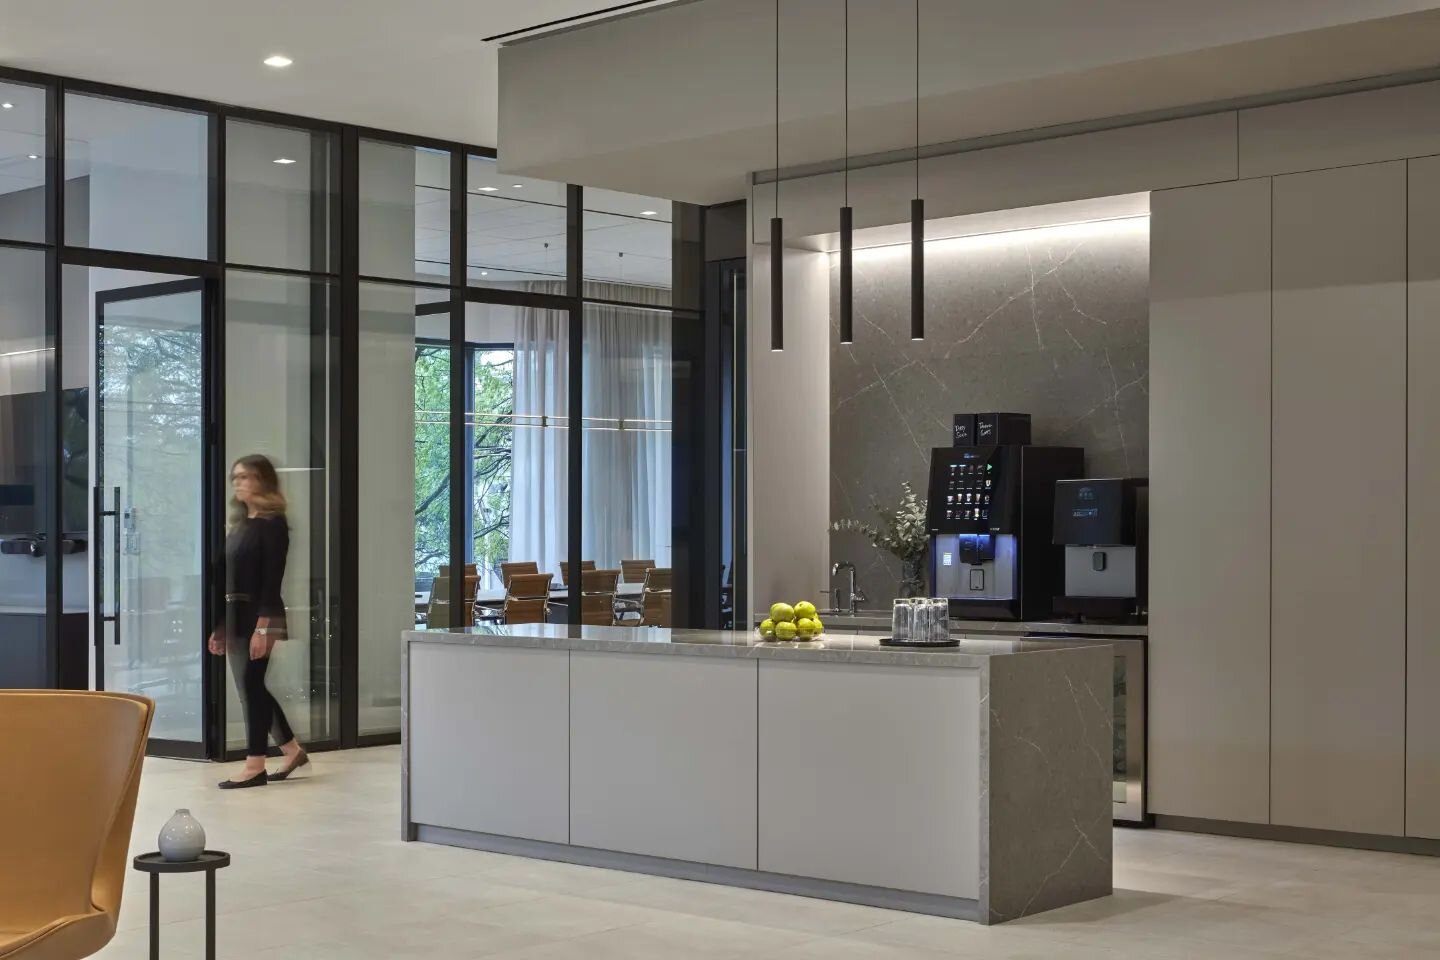 Last year our team collaborated with Rockefeller Capital Management to convert a 26,000 square foot area in Atlanta's Buckhead district into a stunning office space that captures the enduring legacy of the Rockefeller family. Centered around the esta